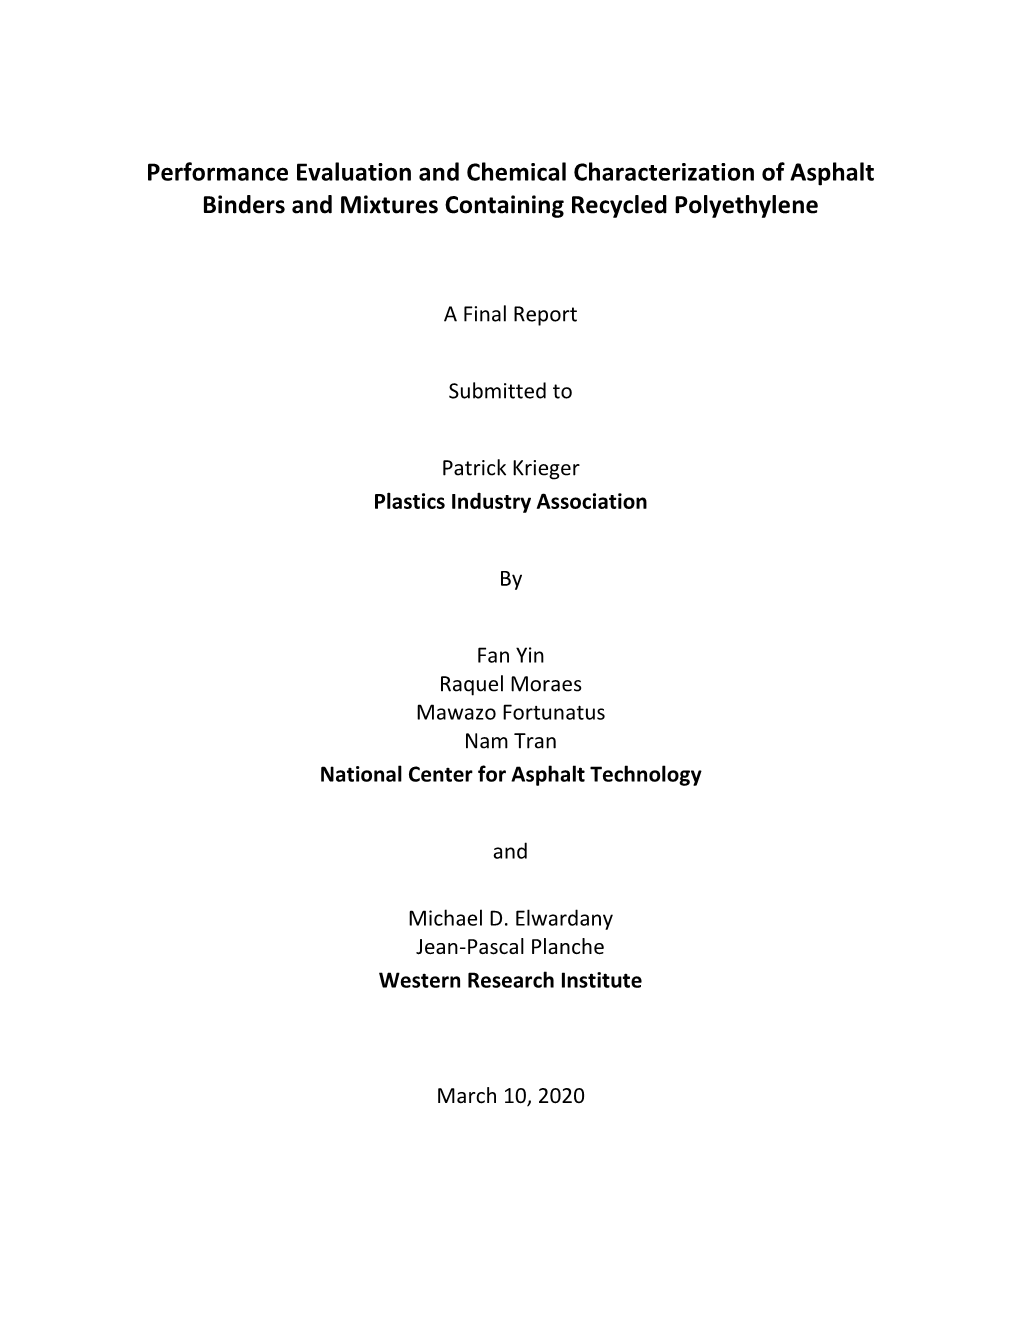 Performance Evaluation and Chemical Characterization of Asphalt Binders and Mixtures Containing Recycled Polyethylene